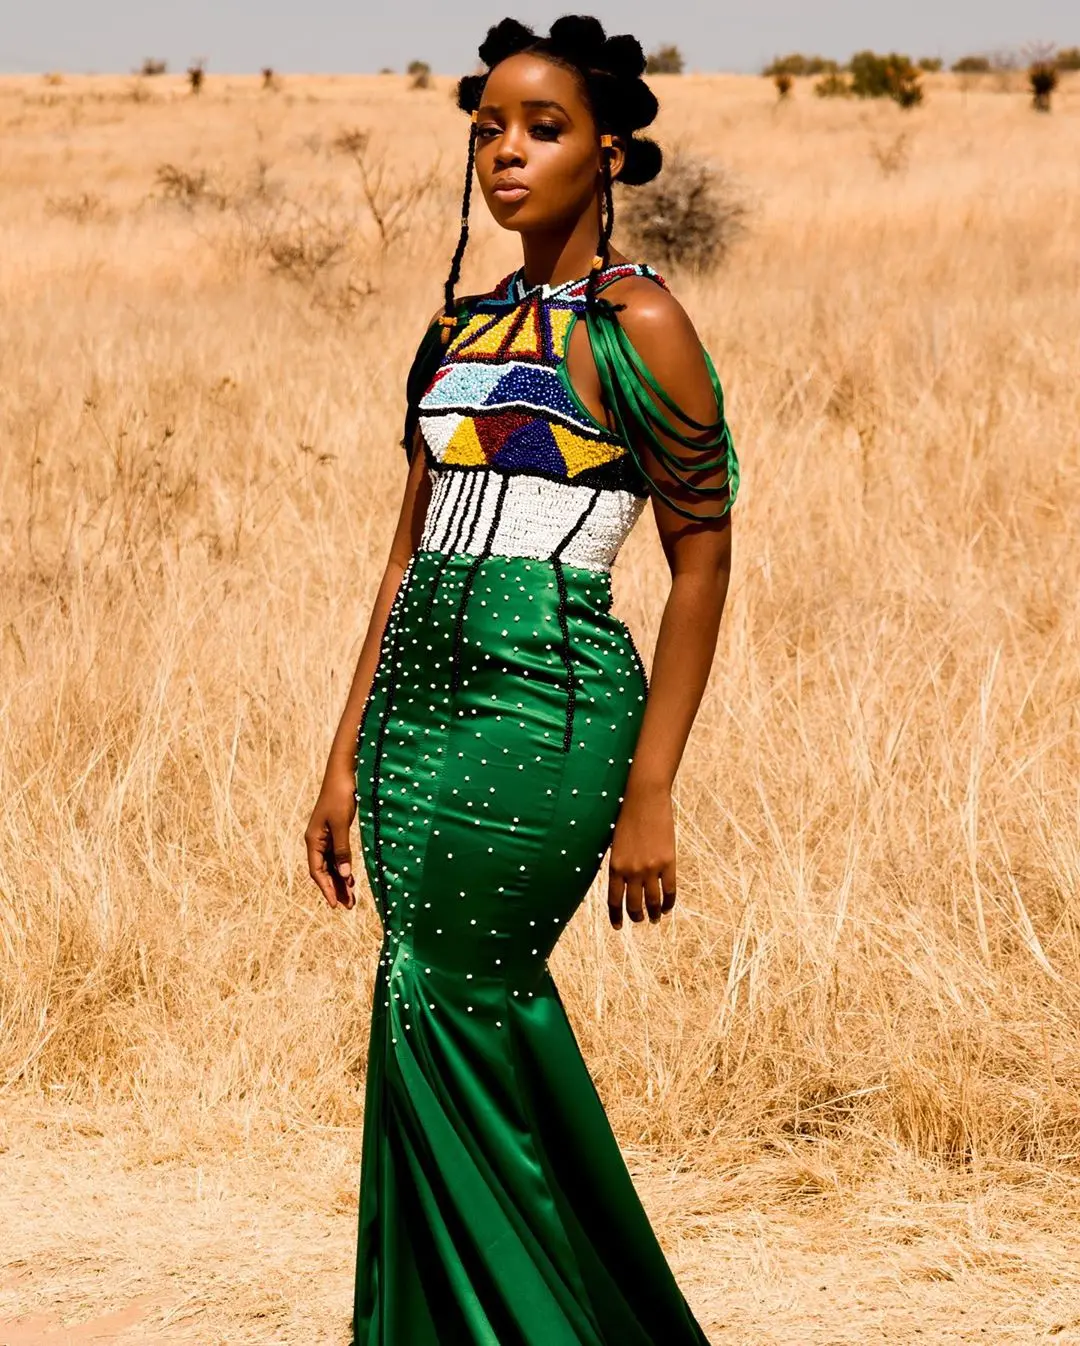 Thuso Mbedu Bags Deal To Produce Socially-Conscious Shows For Paramount+